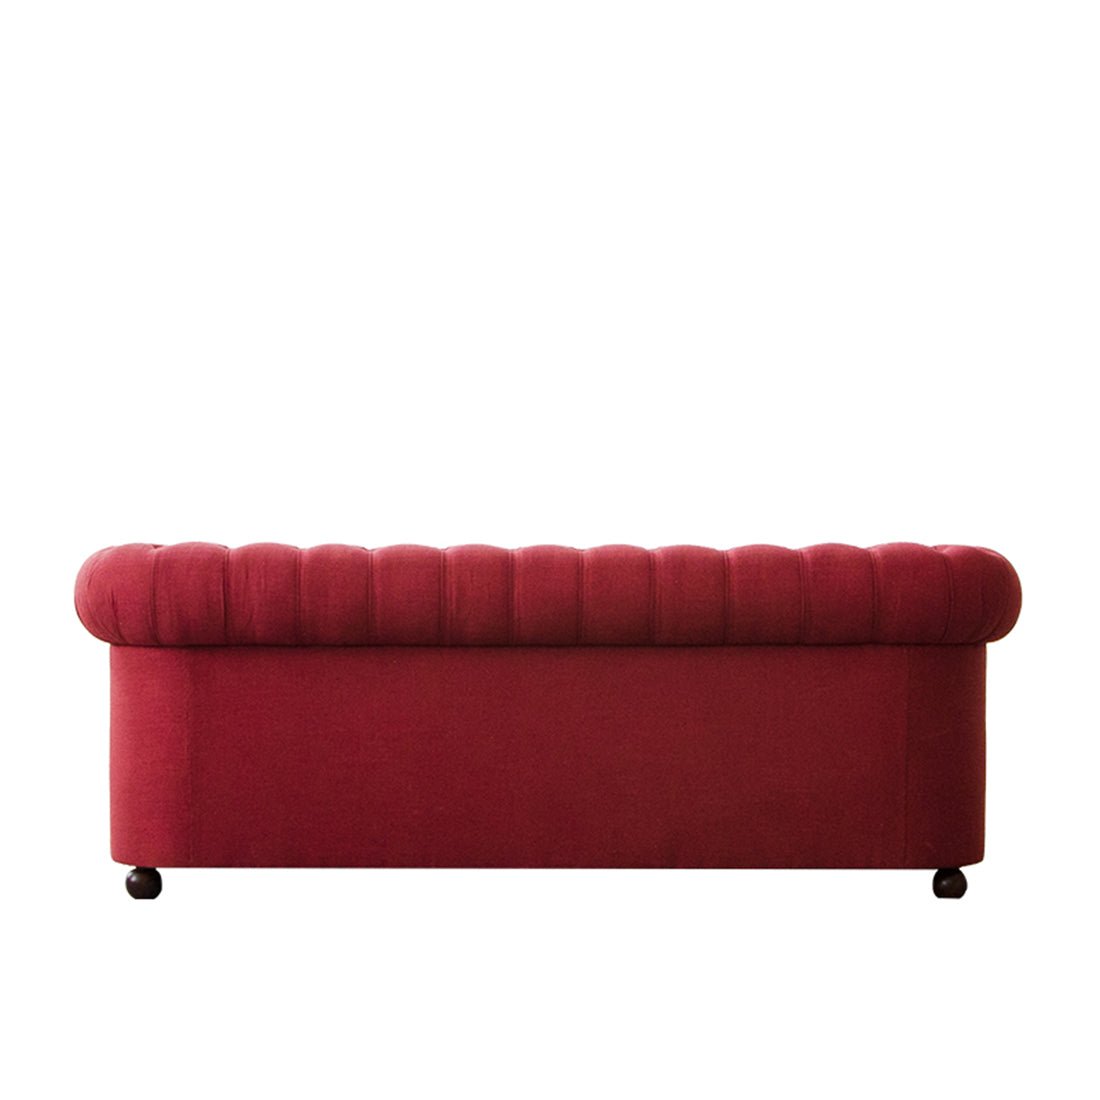 Torque India Marcus solid Wood 3 Seater Fabric Chesterfield Sofa for Living Room - Torque India